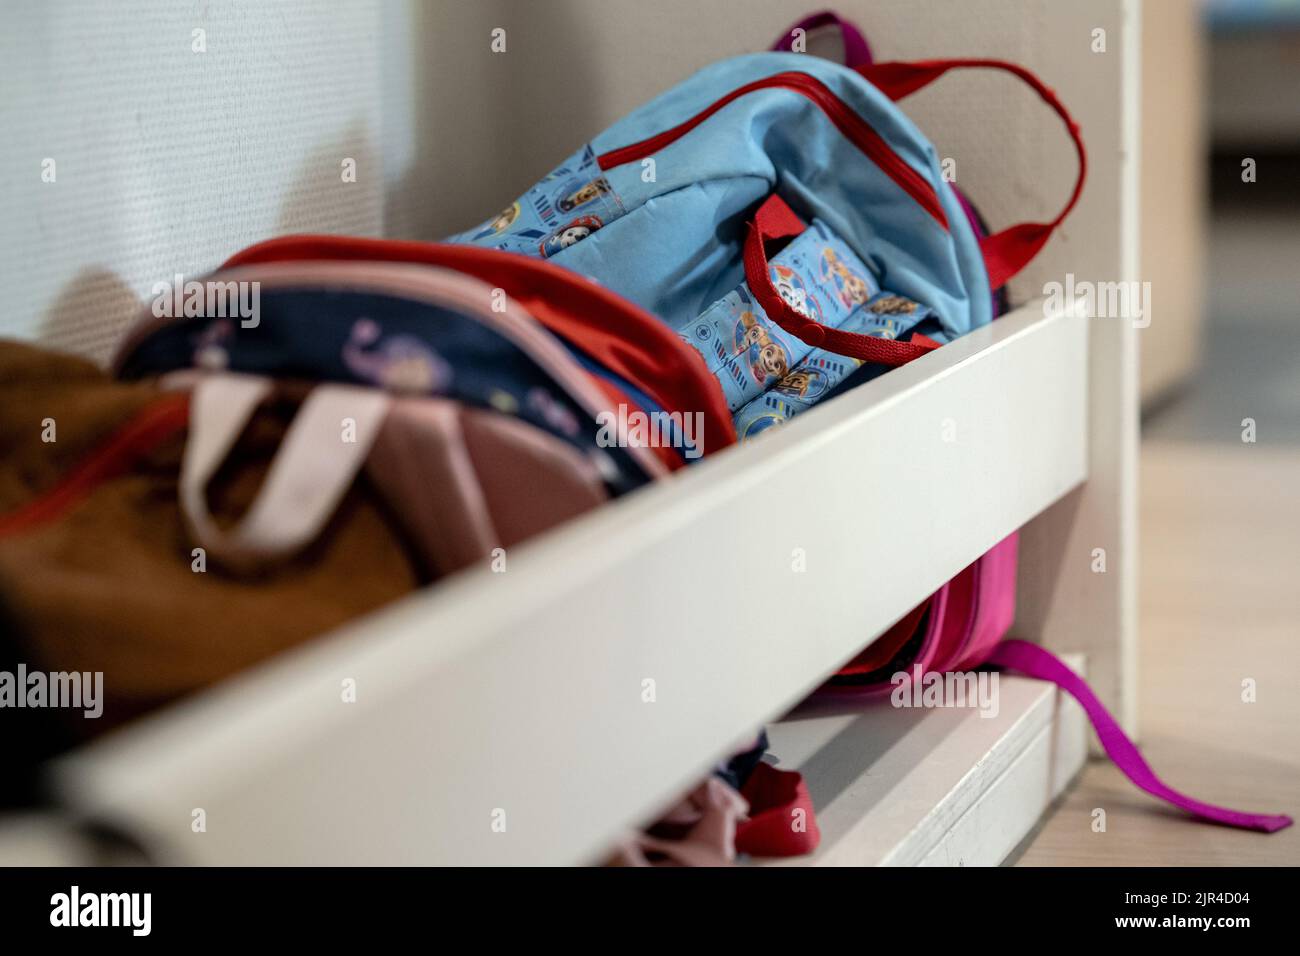 2022-08-22 08:45:20 UTRECHT - The school bags of students of primary school OBS de Gagel on the first day of the 2022 - 2023 school year. Primary and secondary schools in the center of the country will start again, after six weeks off. ANP SANDER KONING netherlands out - belgium out Stock Photo